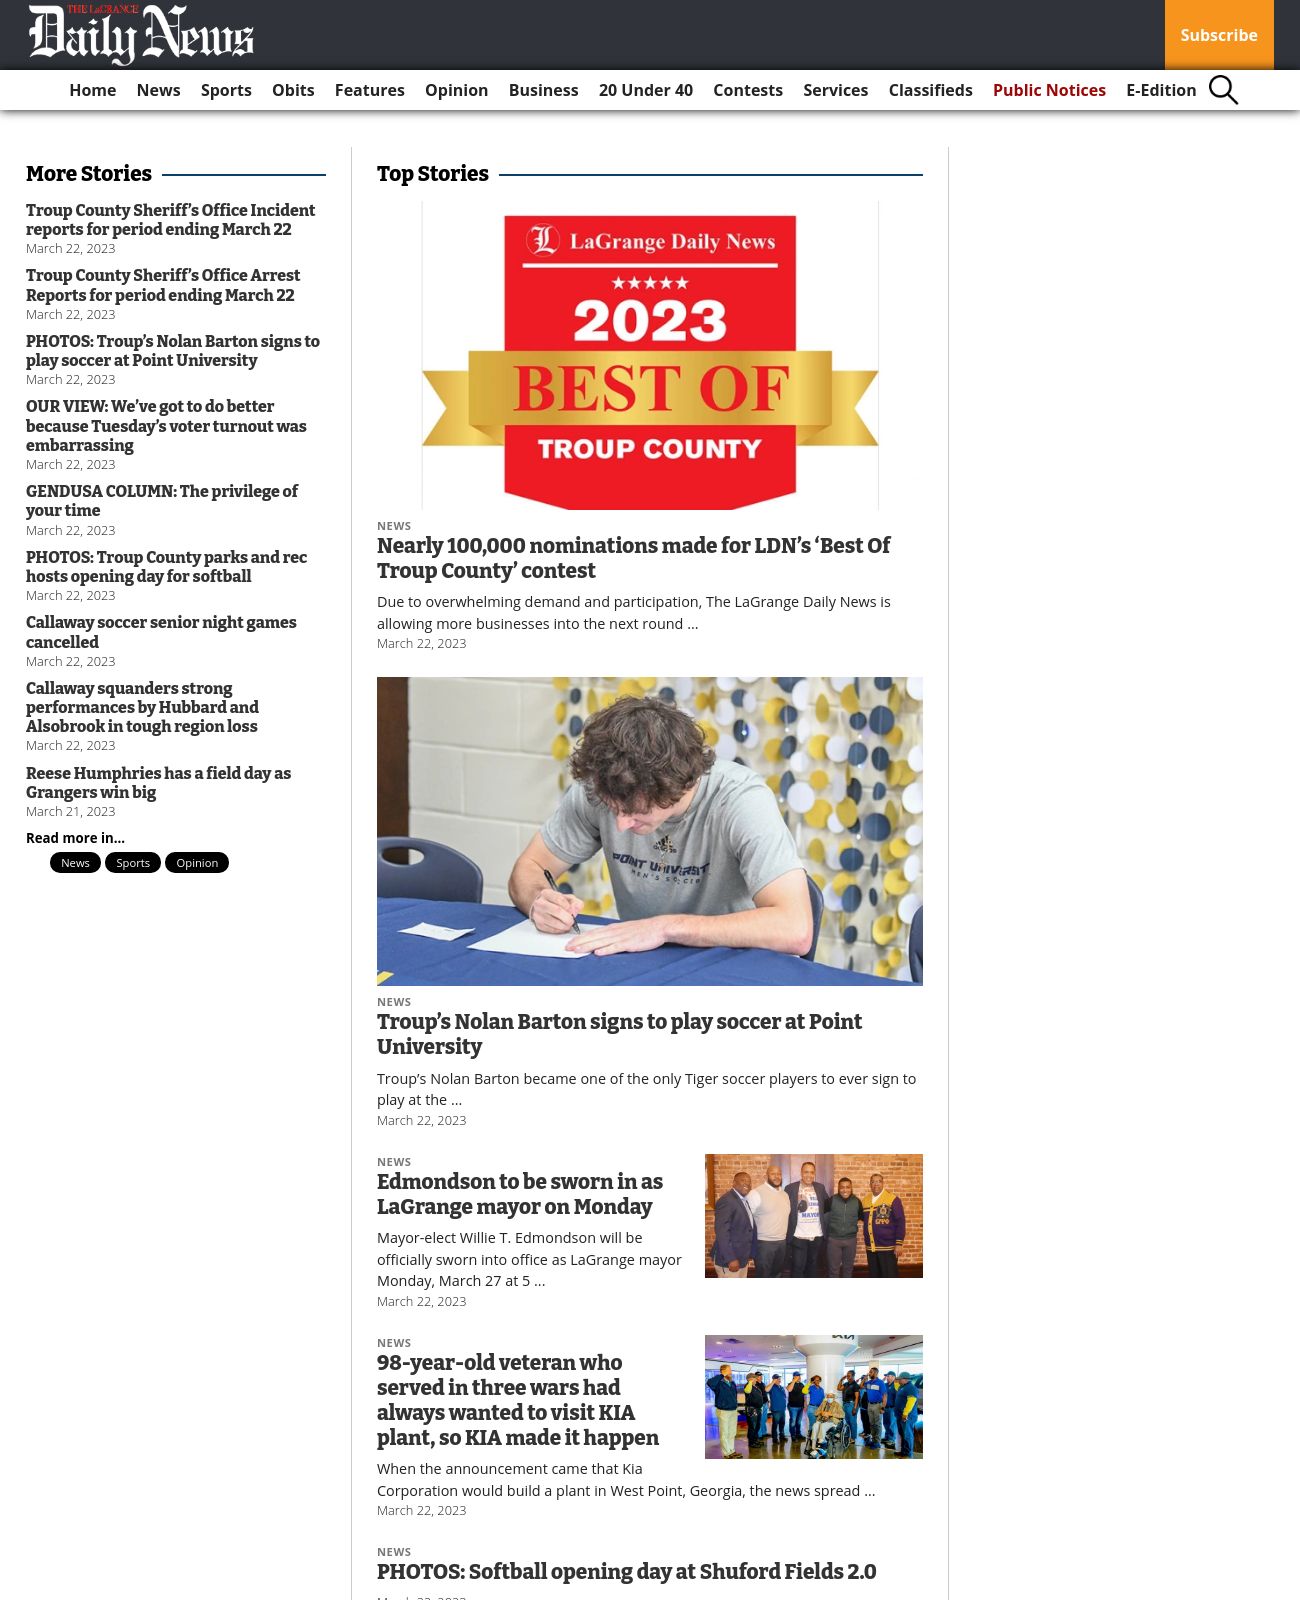 The LaGrange Daily News at 2023-03-22 19:18:15-04:00 local time